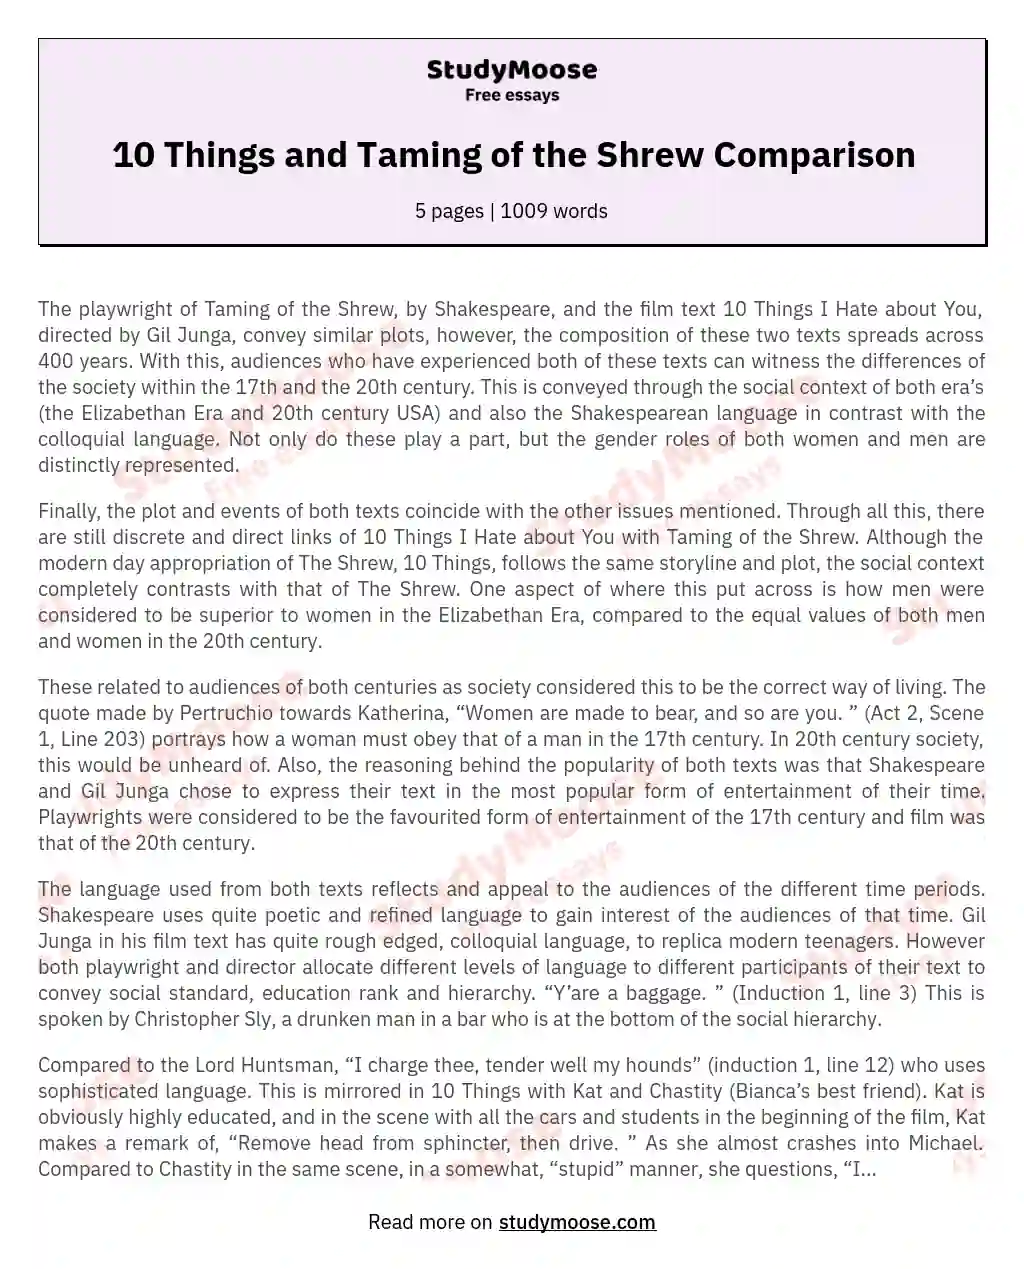 10 Things and Taming of the Shrew Comparison